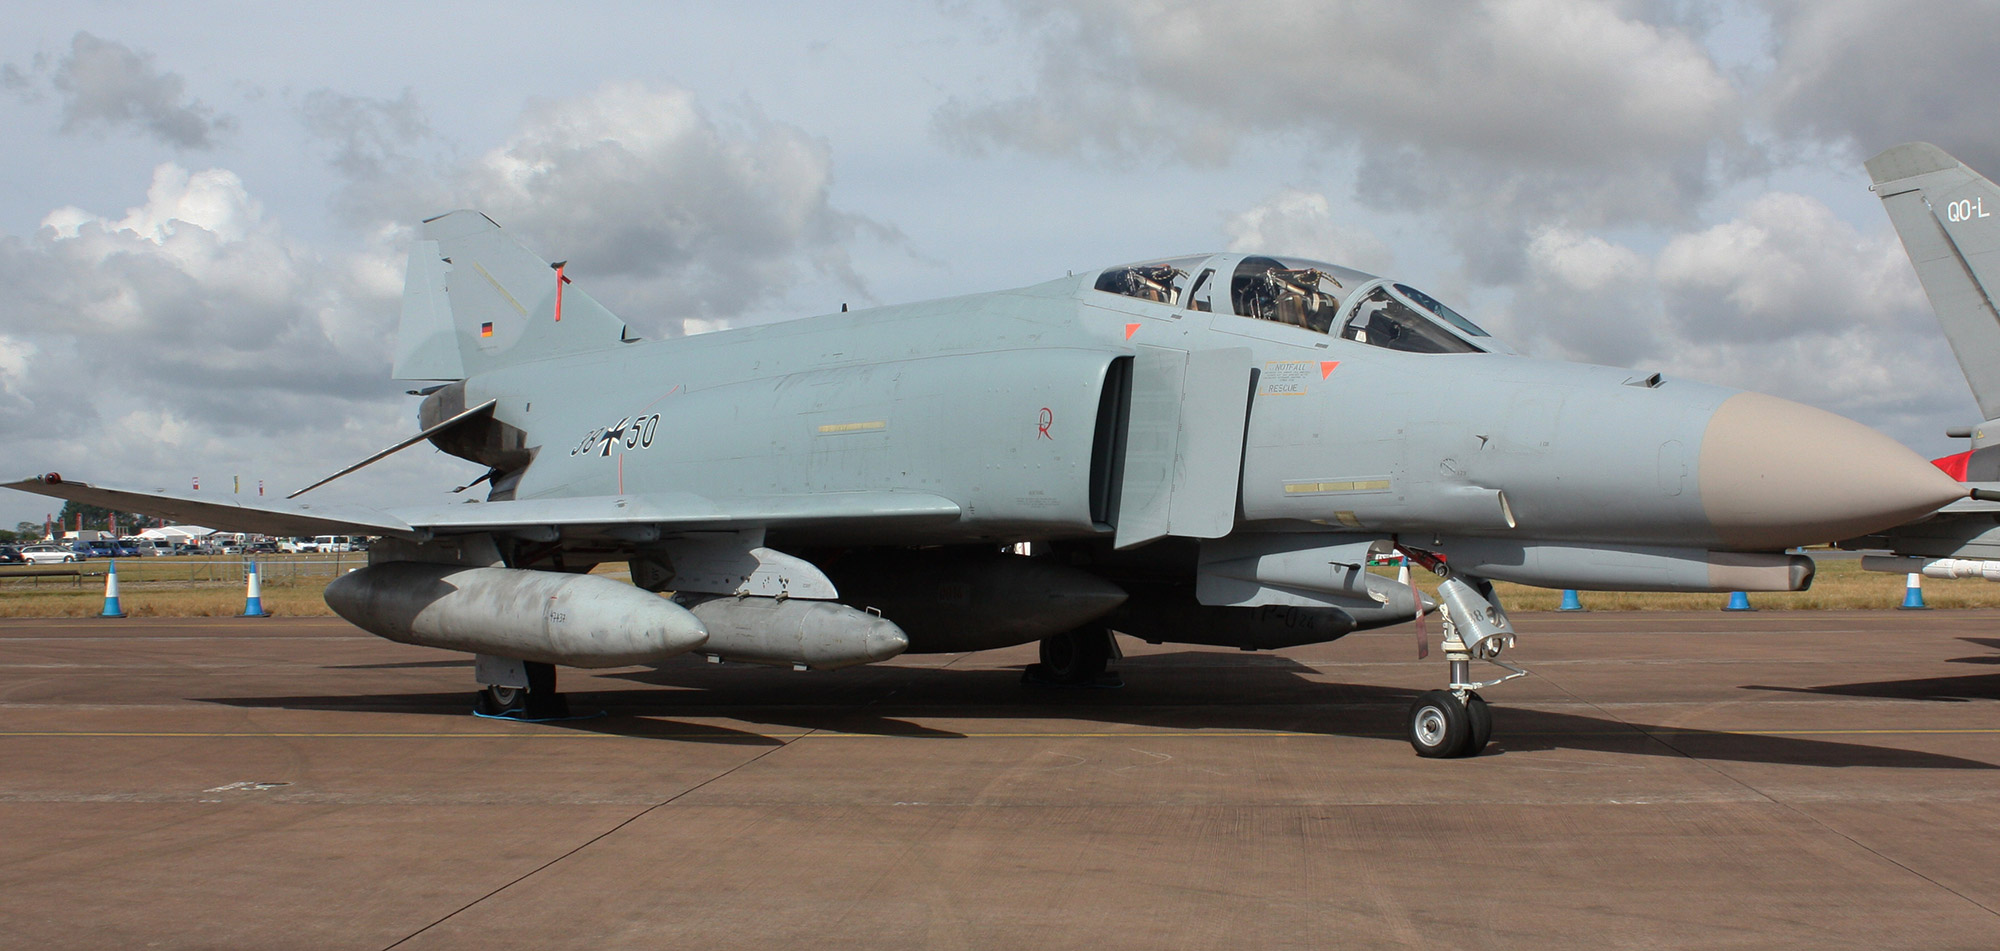 38+50 taking part in the static display at RIAT 2009